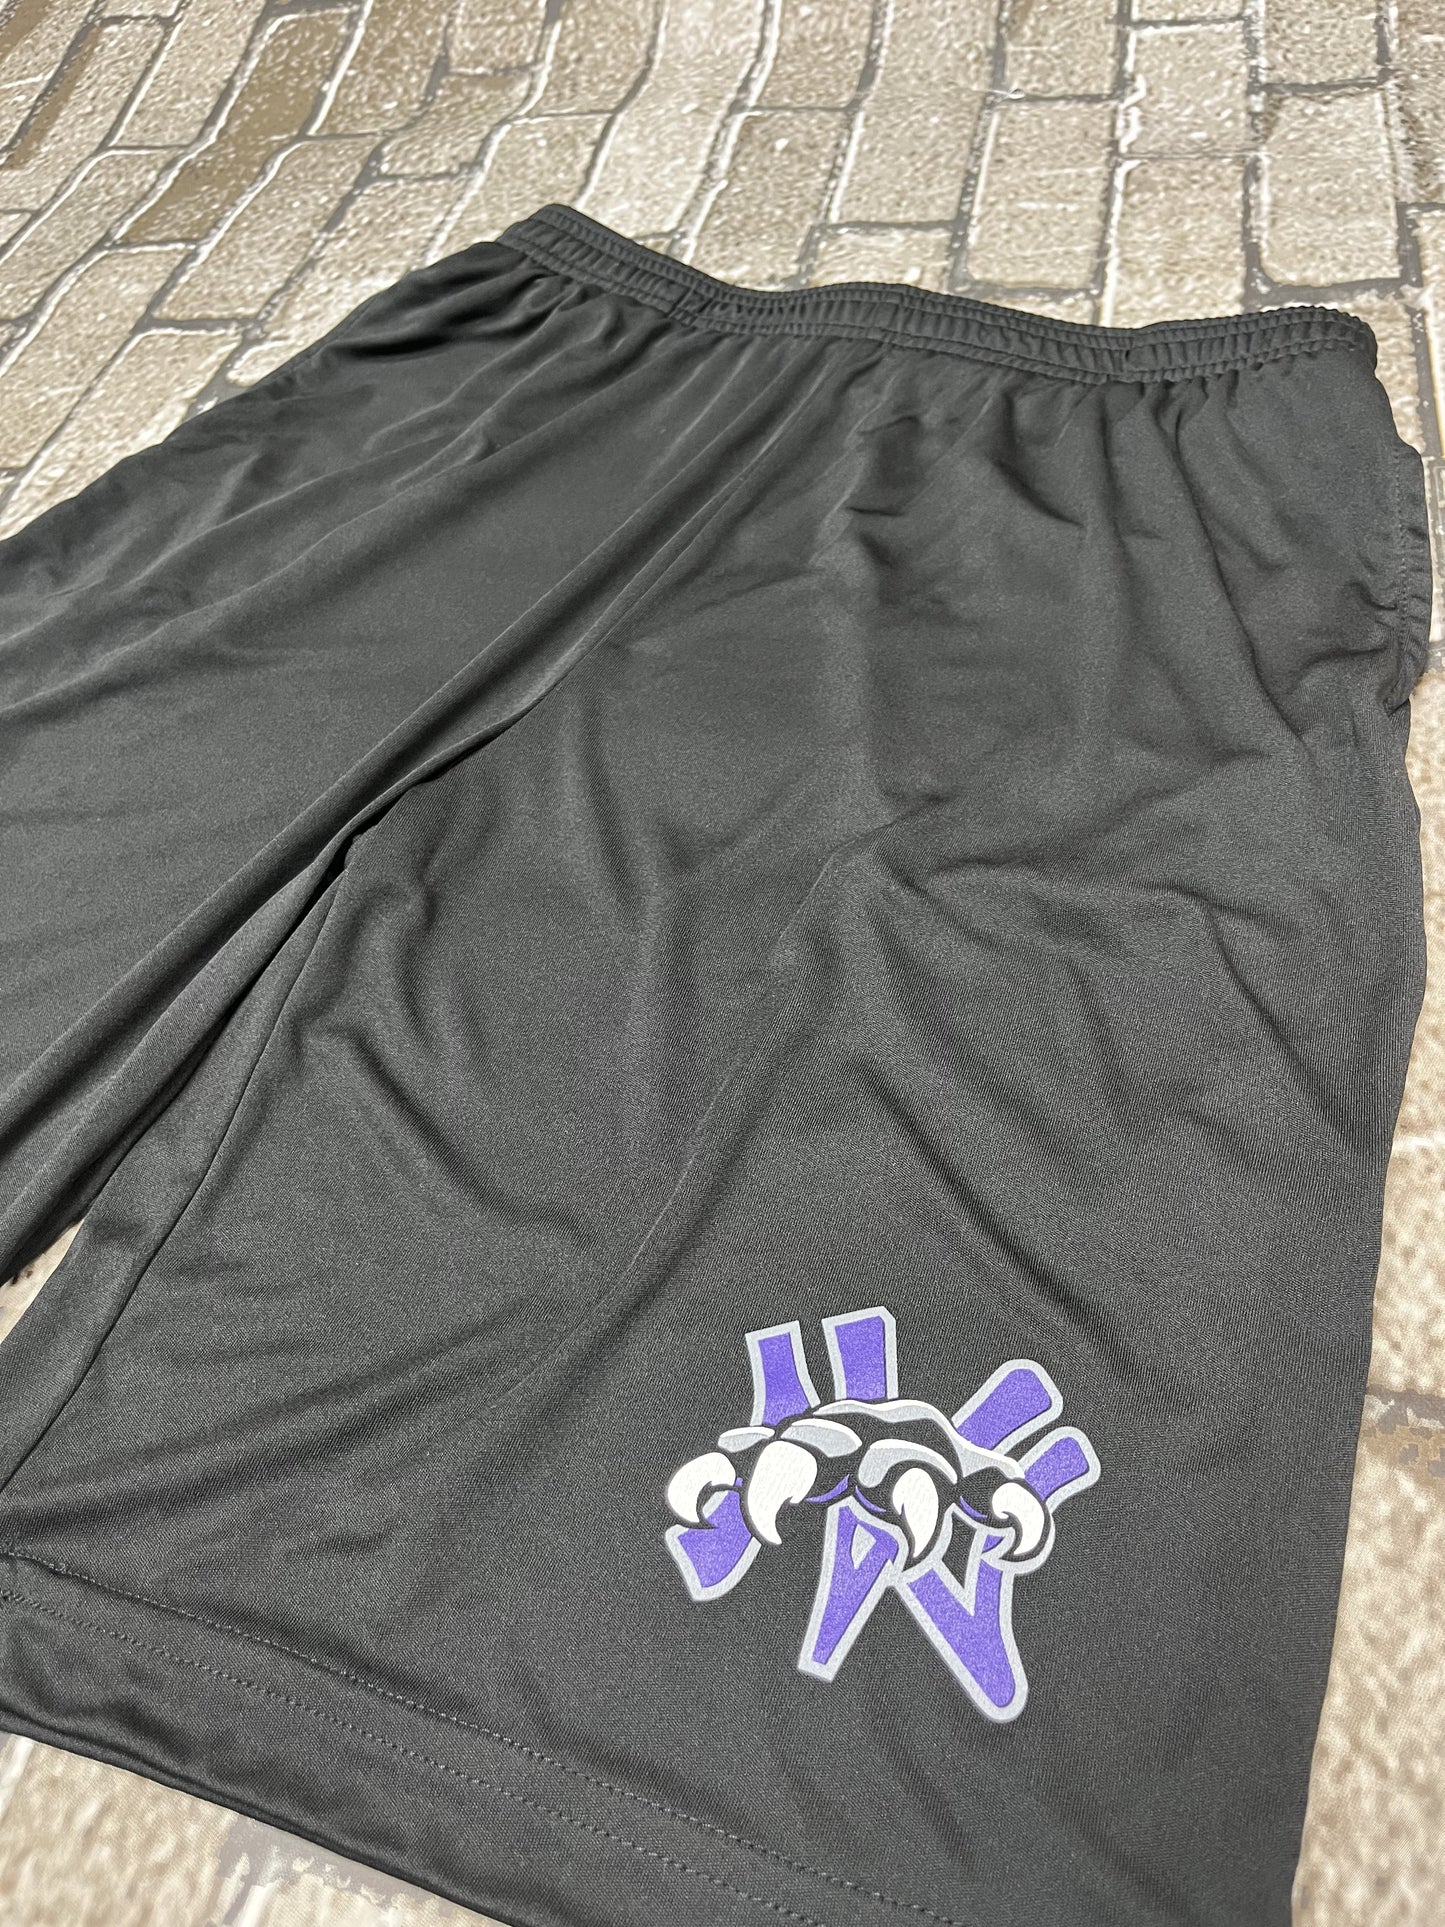 NV Claw Sport Tek Competitor Shorts